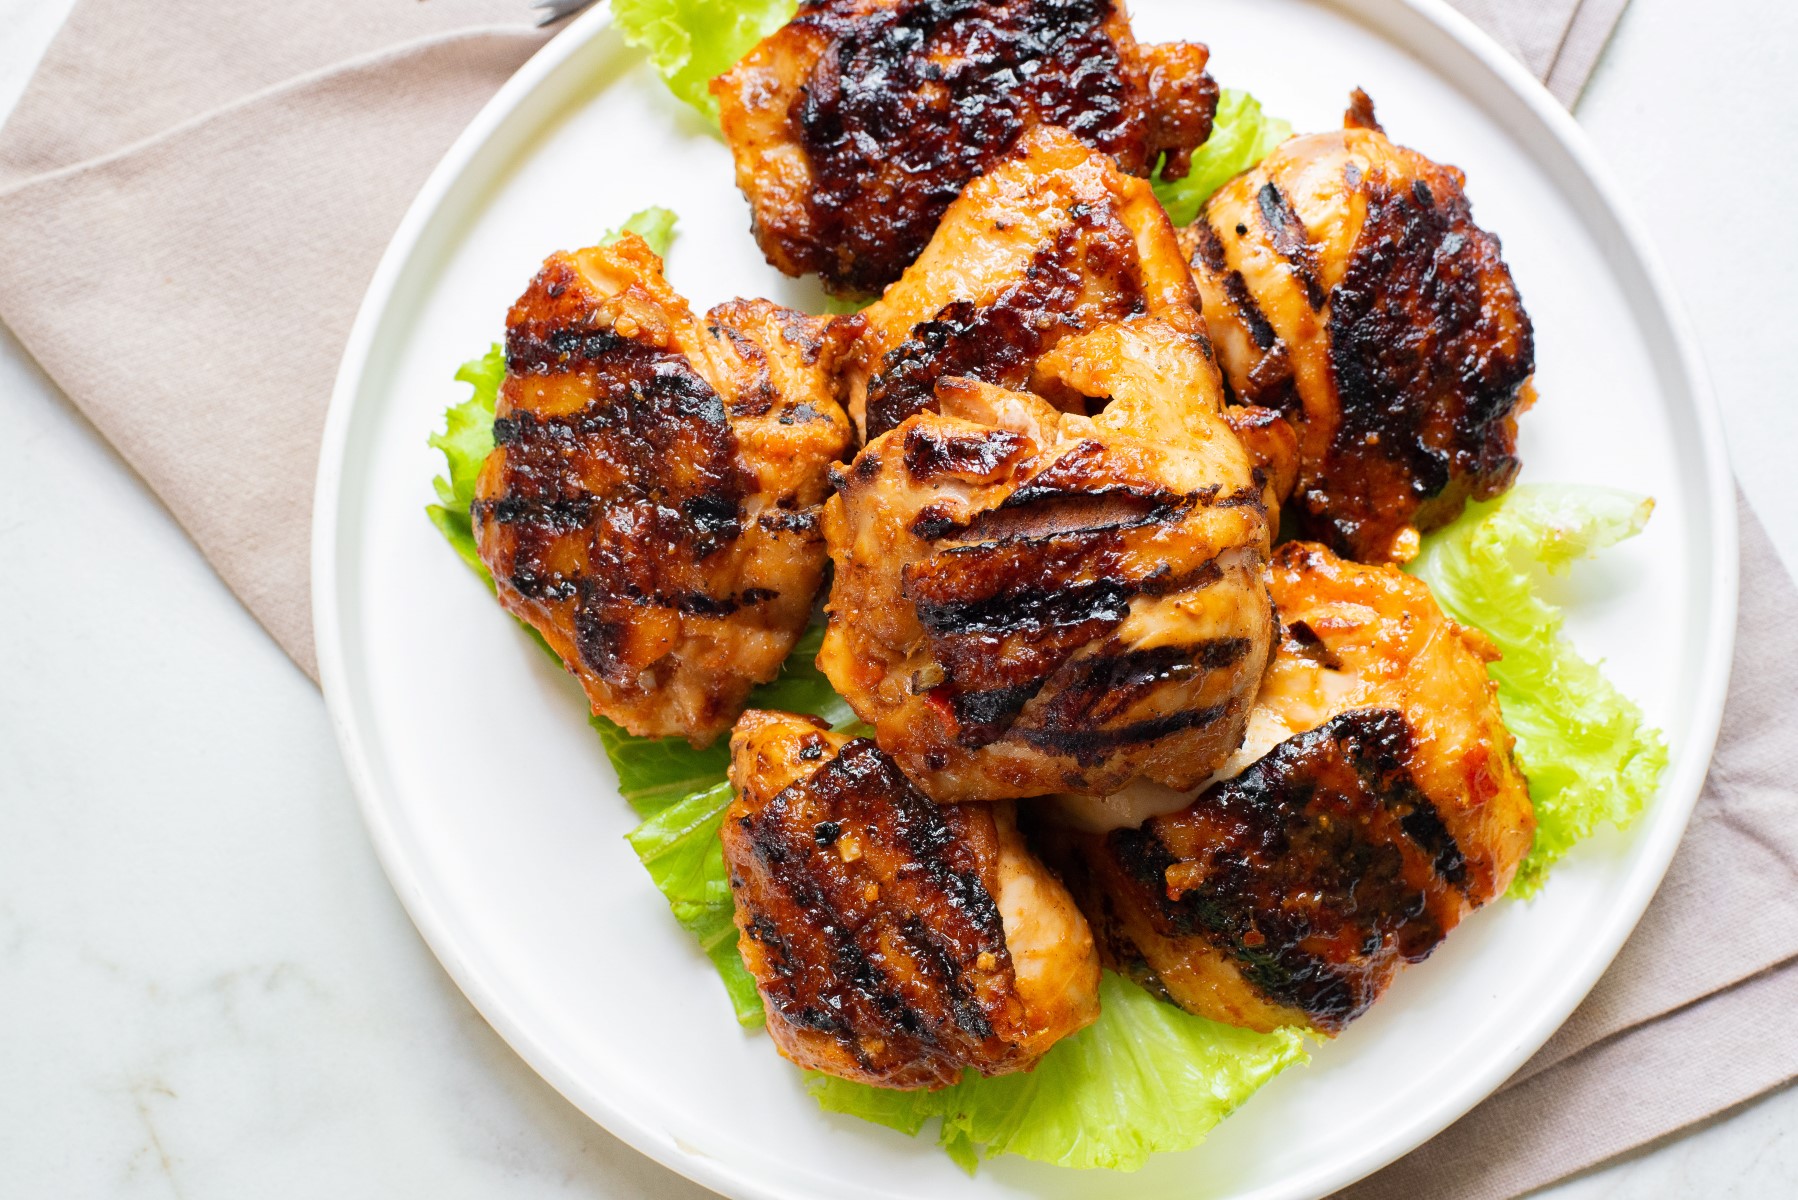 Grilled Harissa Chicken Thighs on a bed of lettuce servind on a white platter.